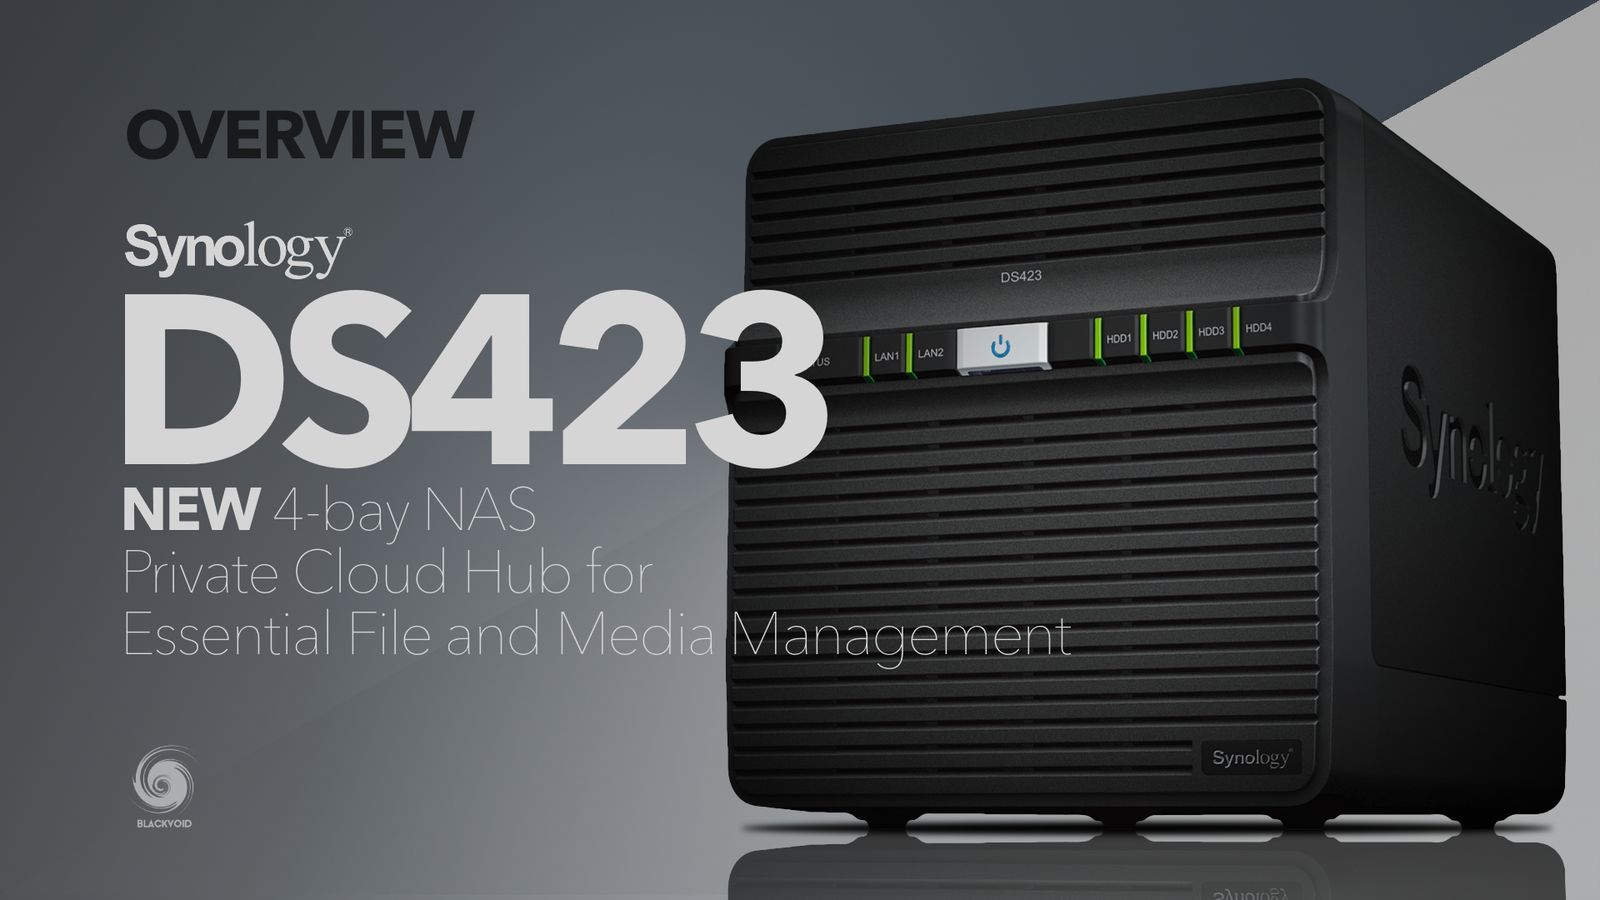 Synology DS423 pregled